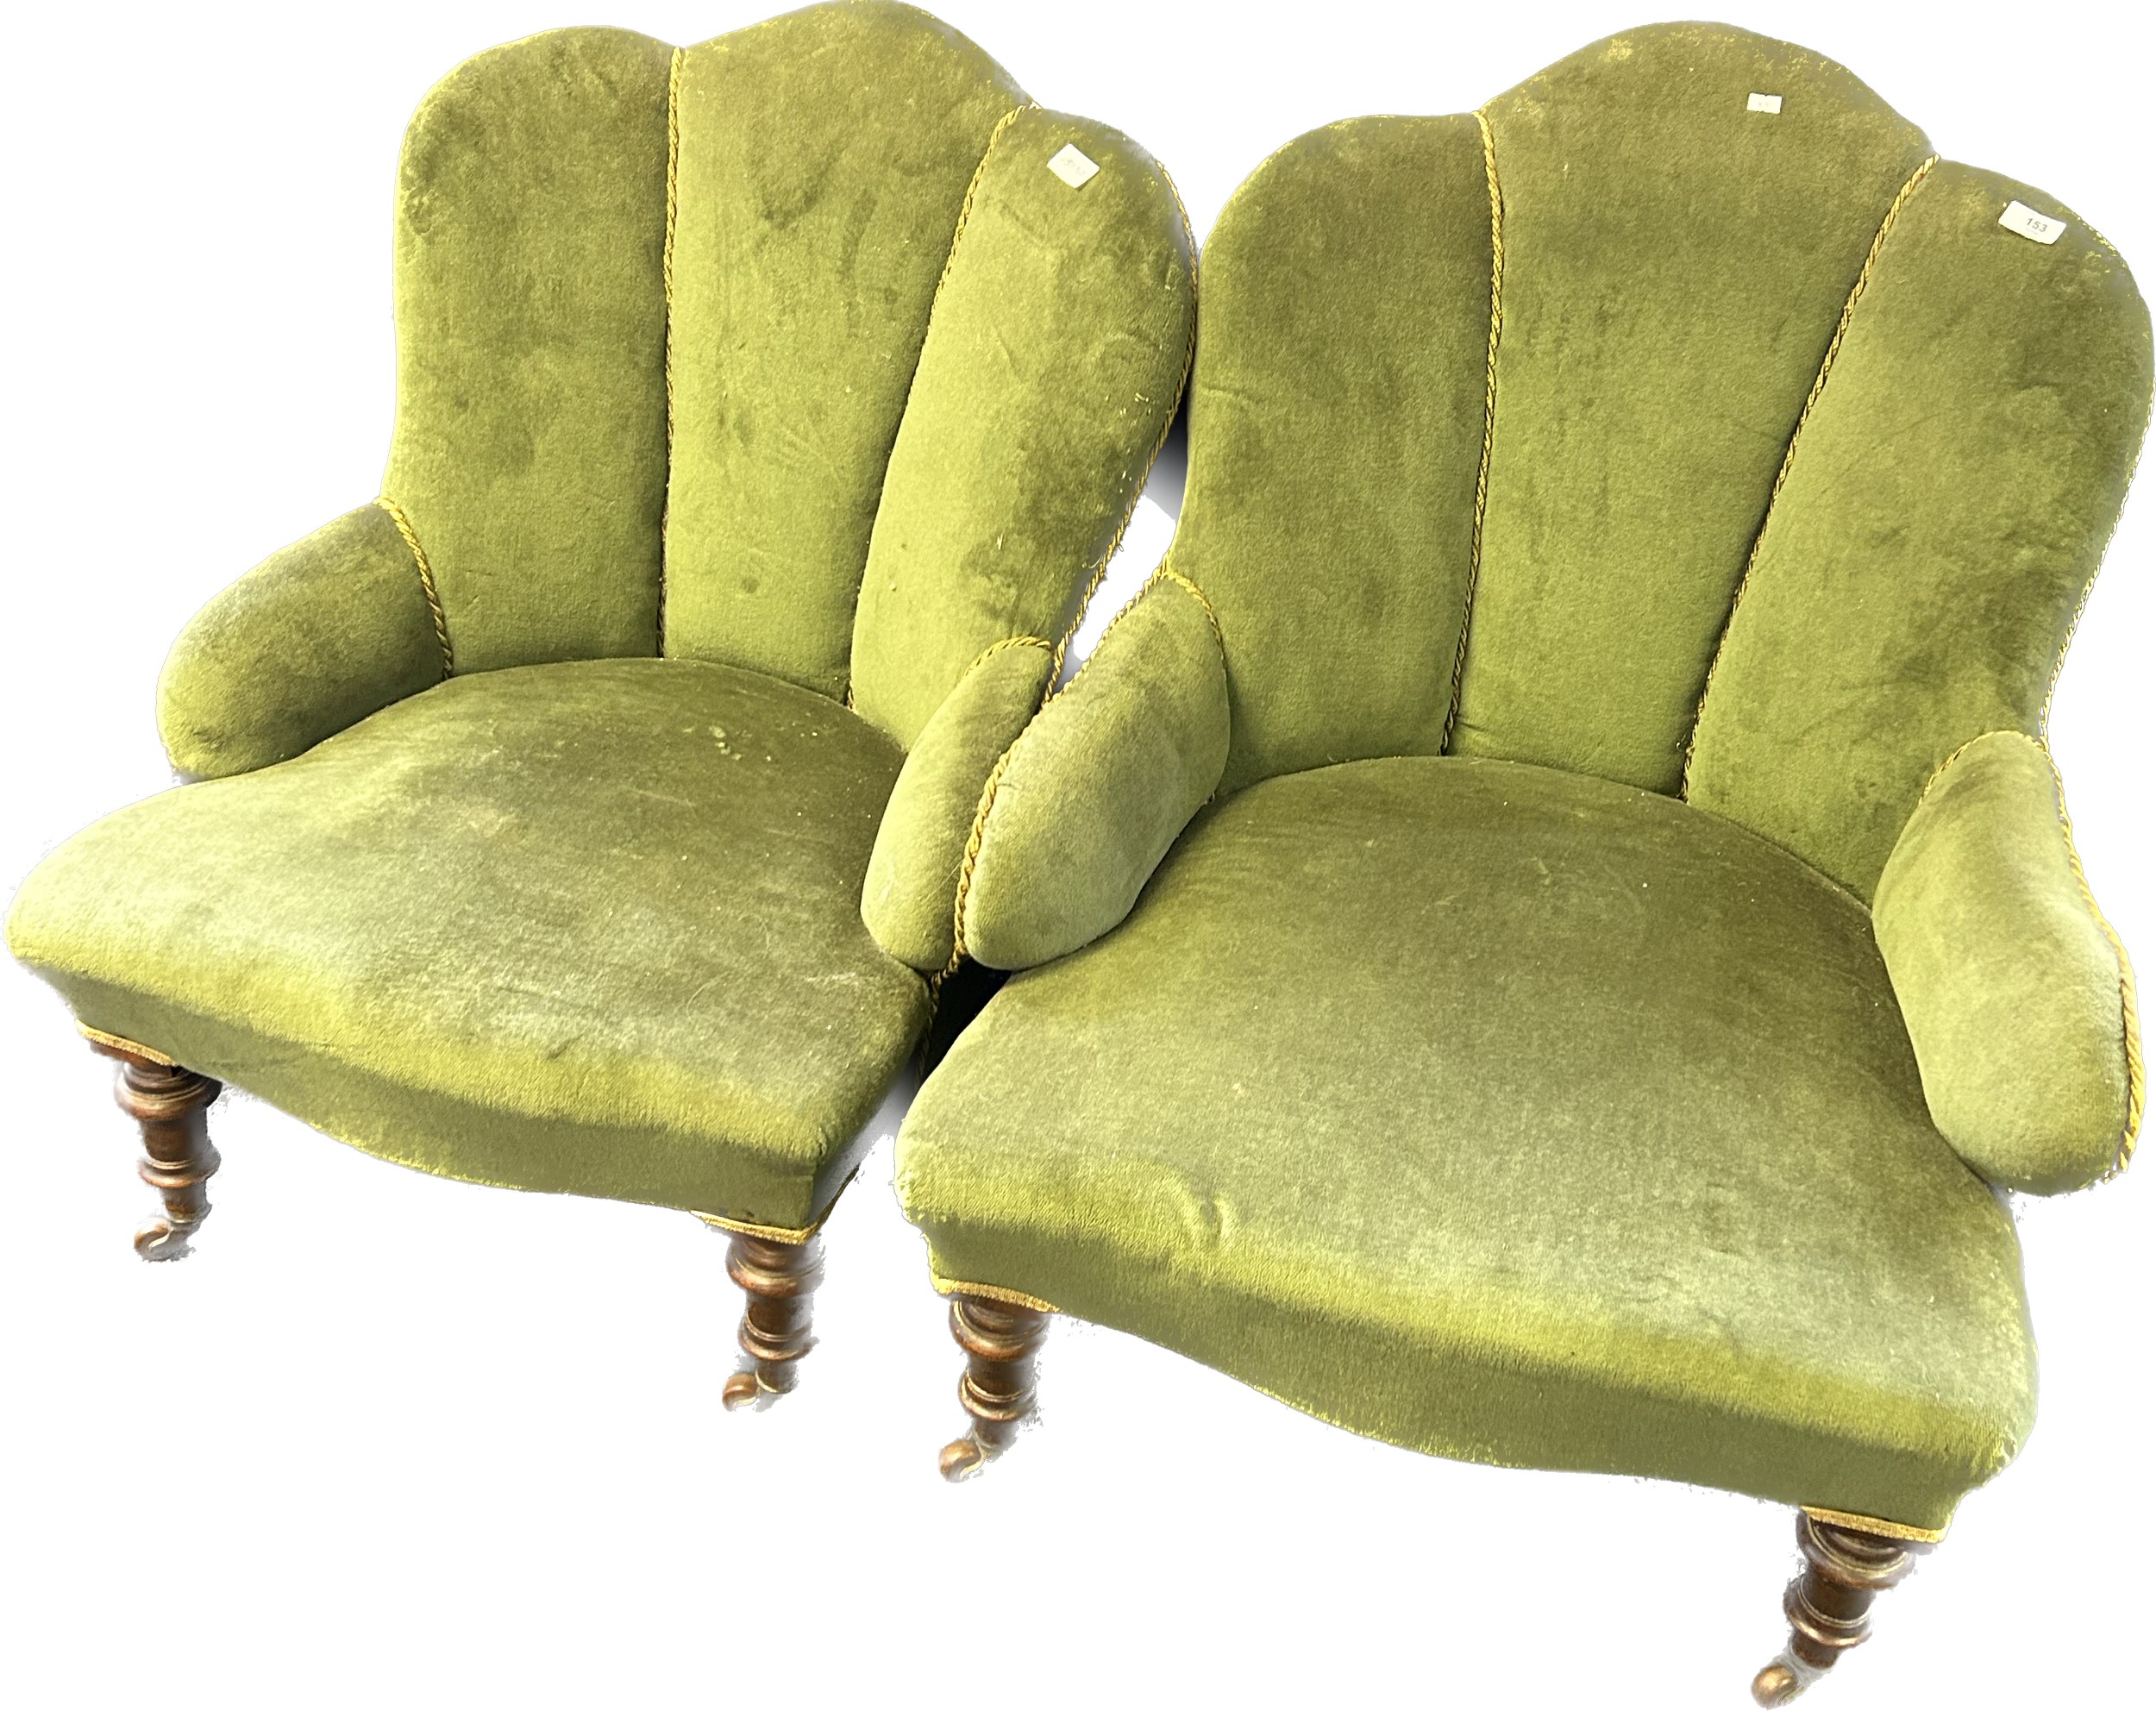 Pair of art deco cushioned chairs, covered in a green upholstery, raised on turned tapered legs - Image 2 of 5